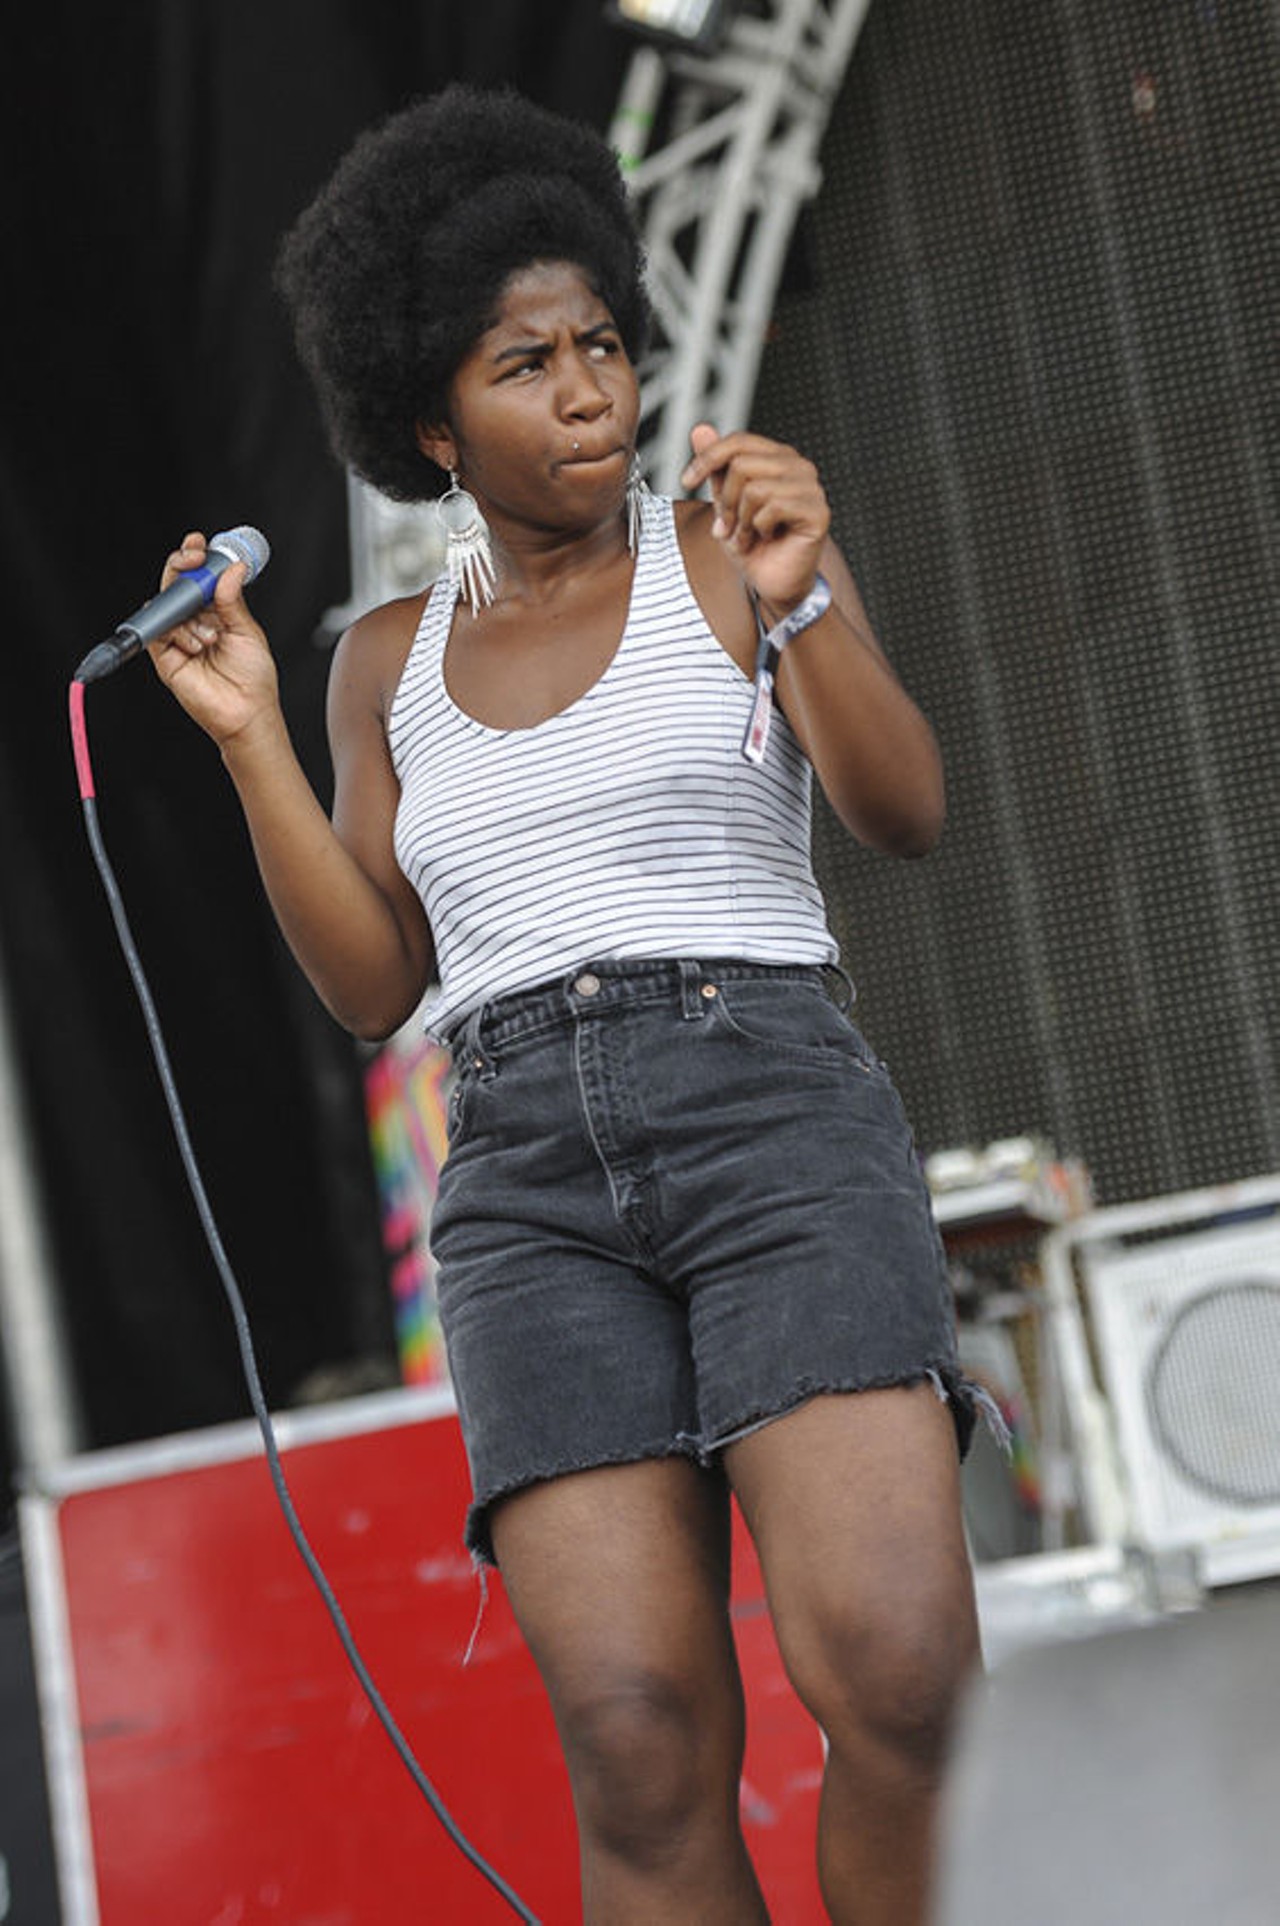 Thee Satisfaction perform at LouFest. More photos from Day 2 of LouFest.